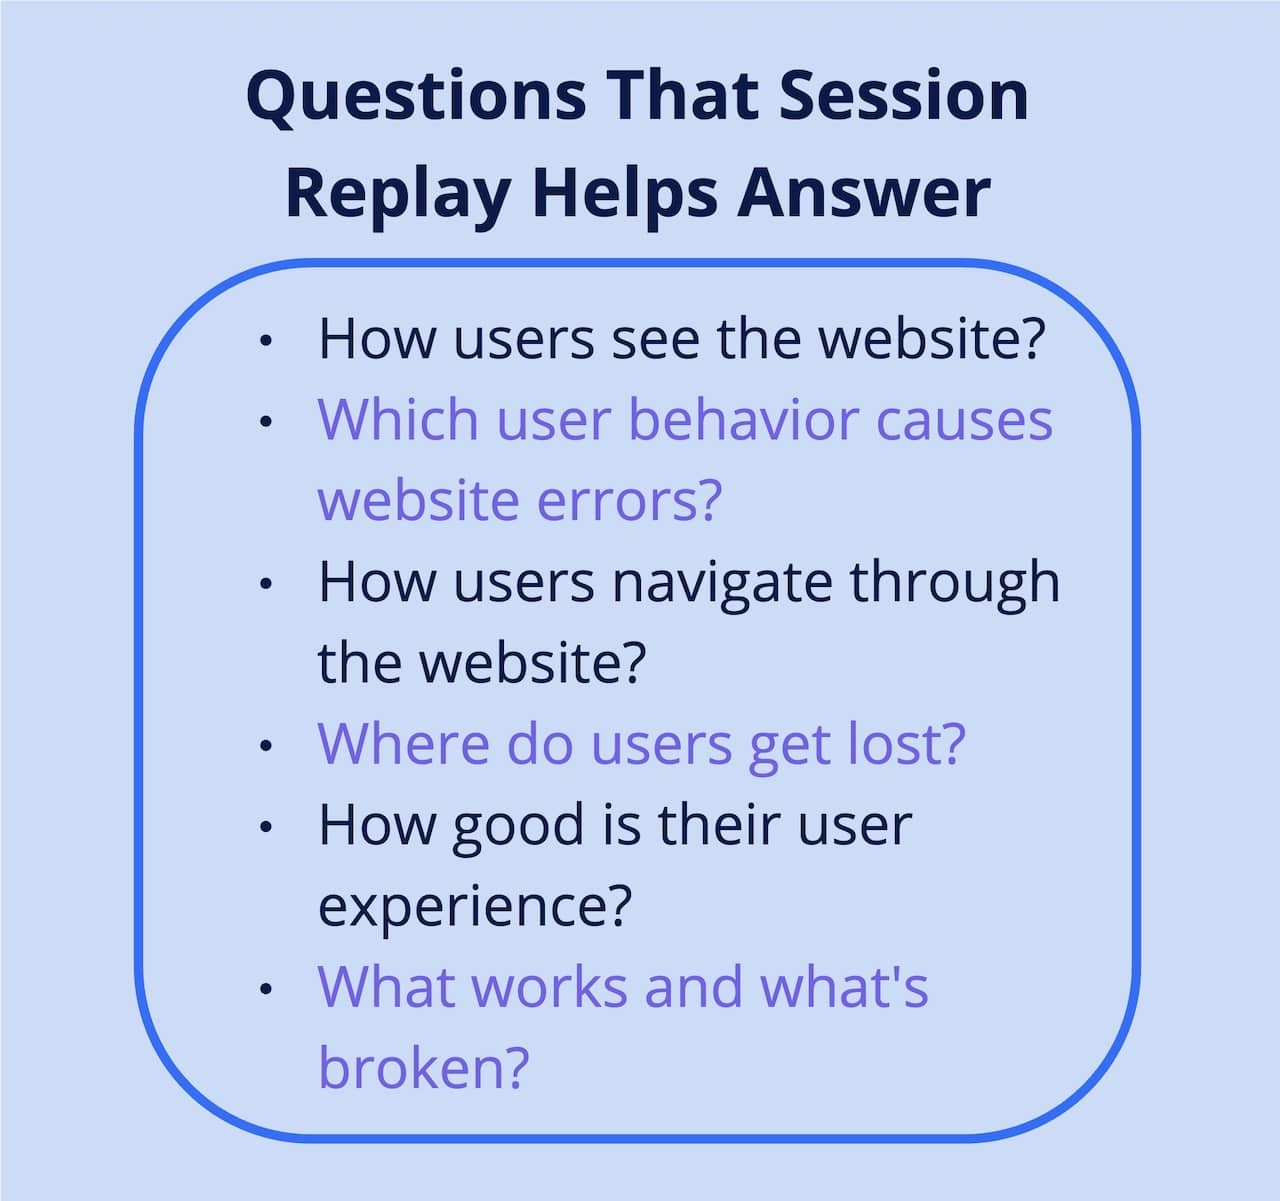 Questions that session replay can answer